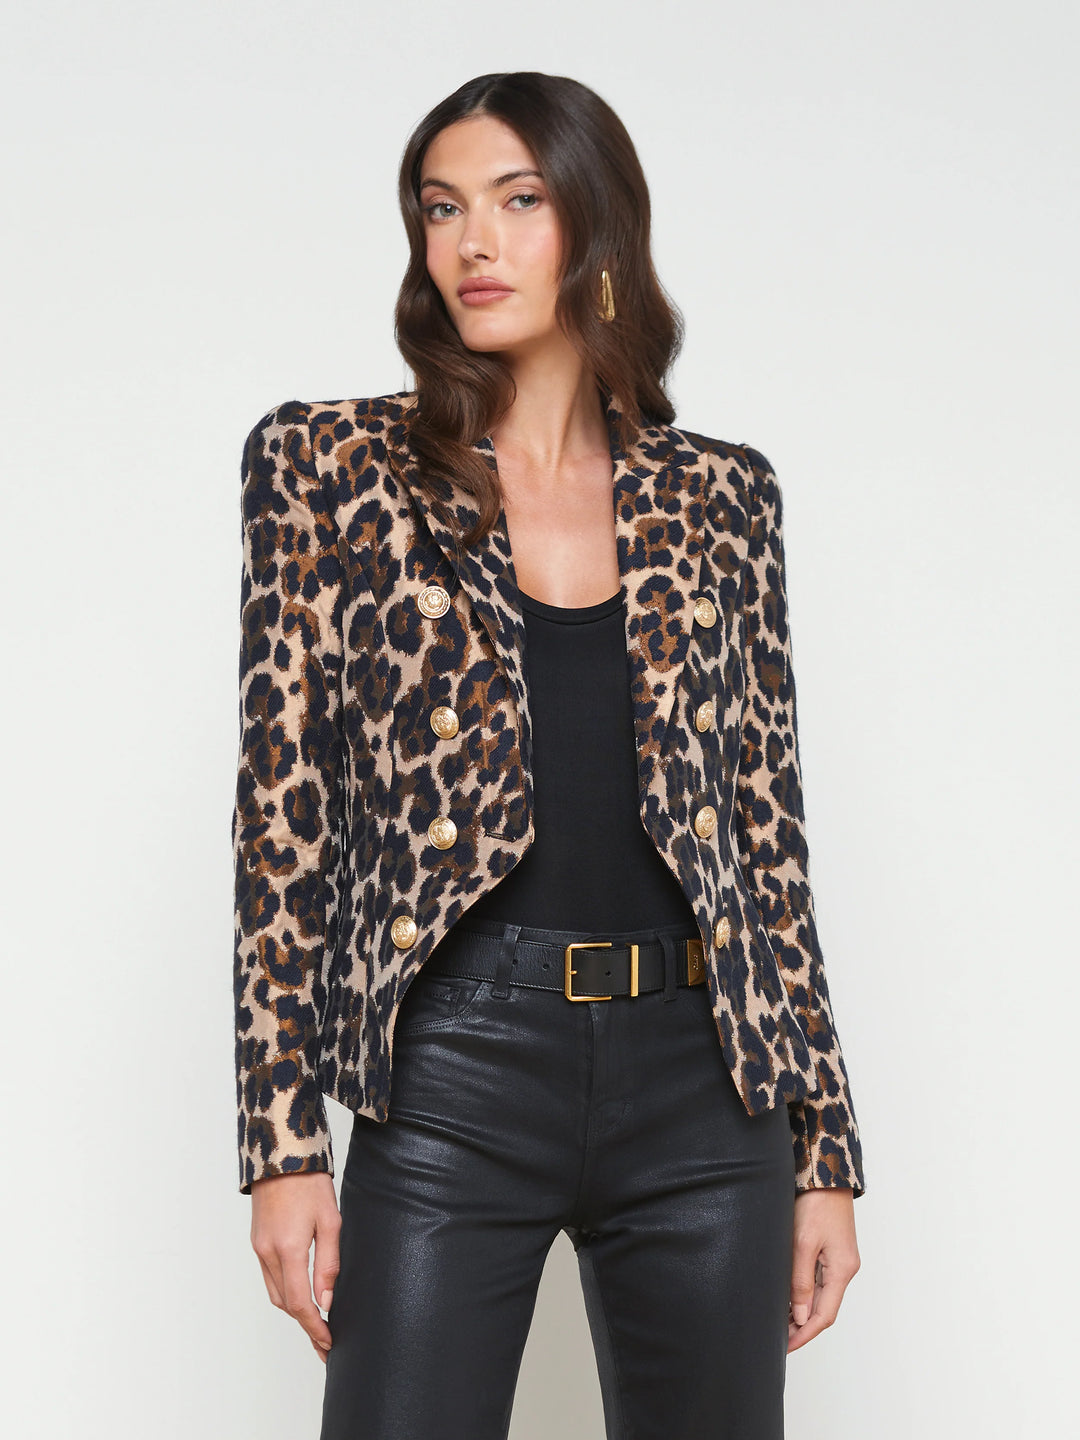 BETHANY STRUCTURED LEOPARD BLAZER - L'AGENCE